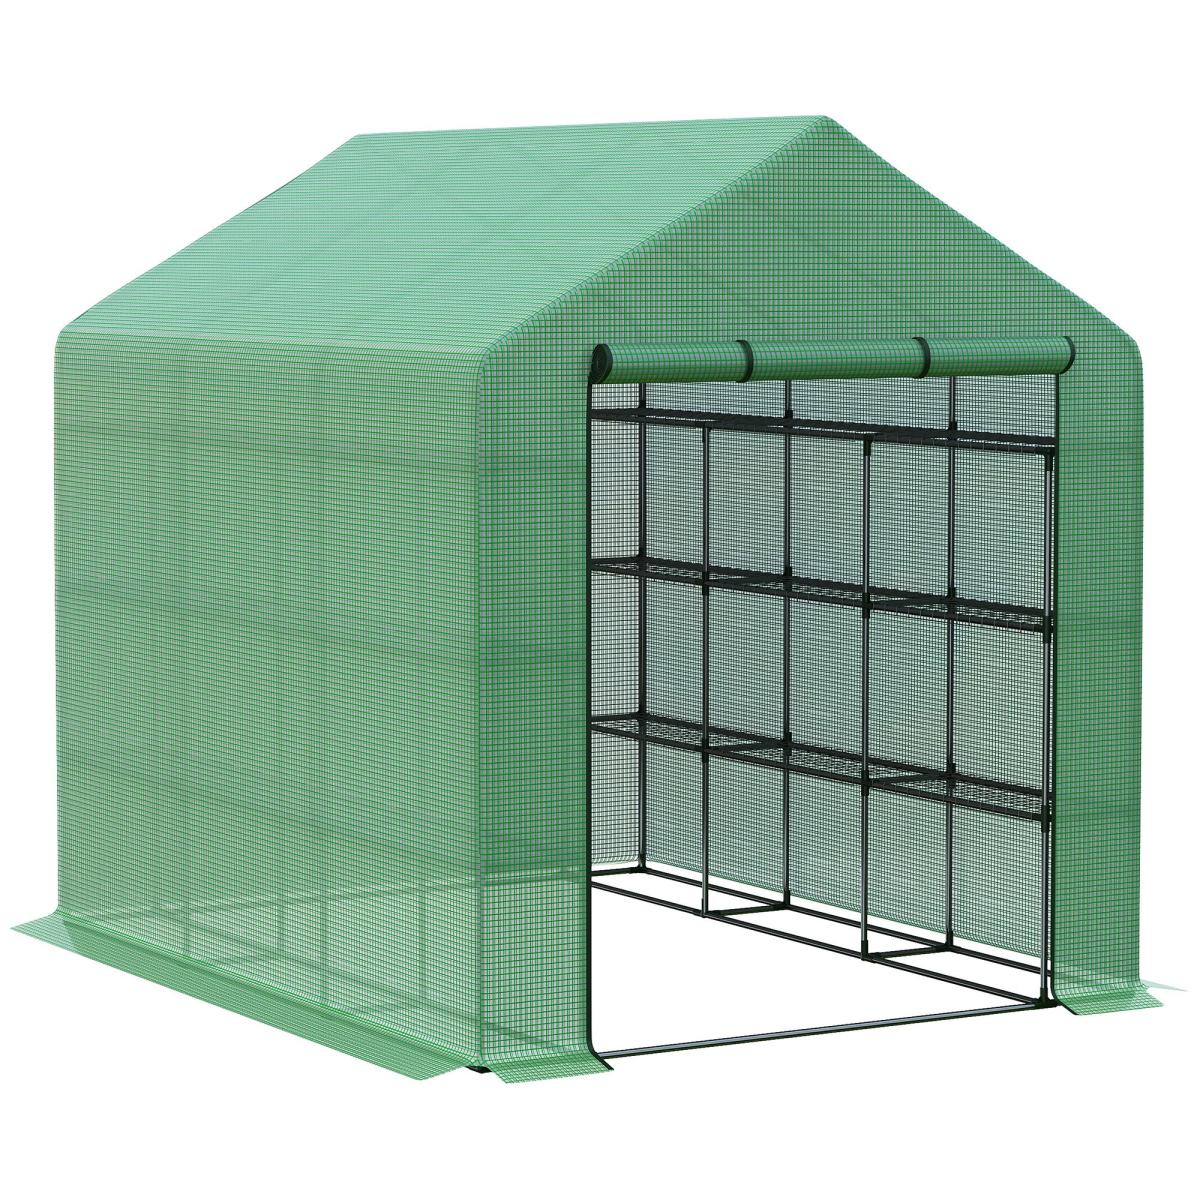 Walk-in Greenhouse for Outdoors with Roll-up Zipper Door, 18 Shelves, Pe Cover, Small & Portable Build, Heavy Duty Humidity Seal, 95.25